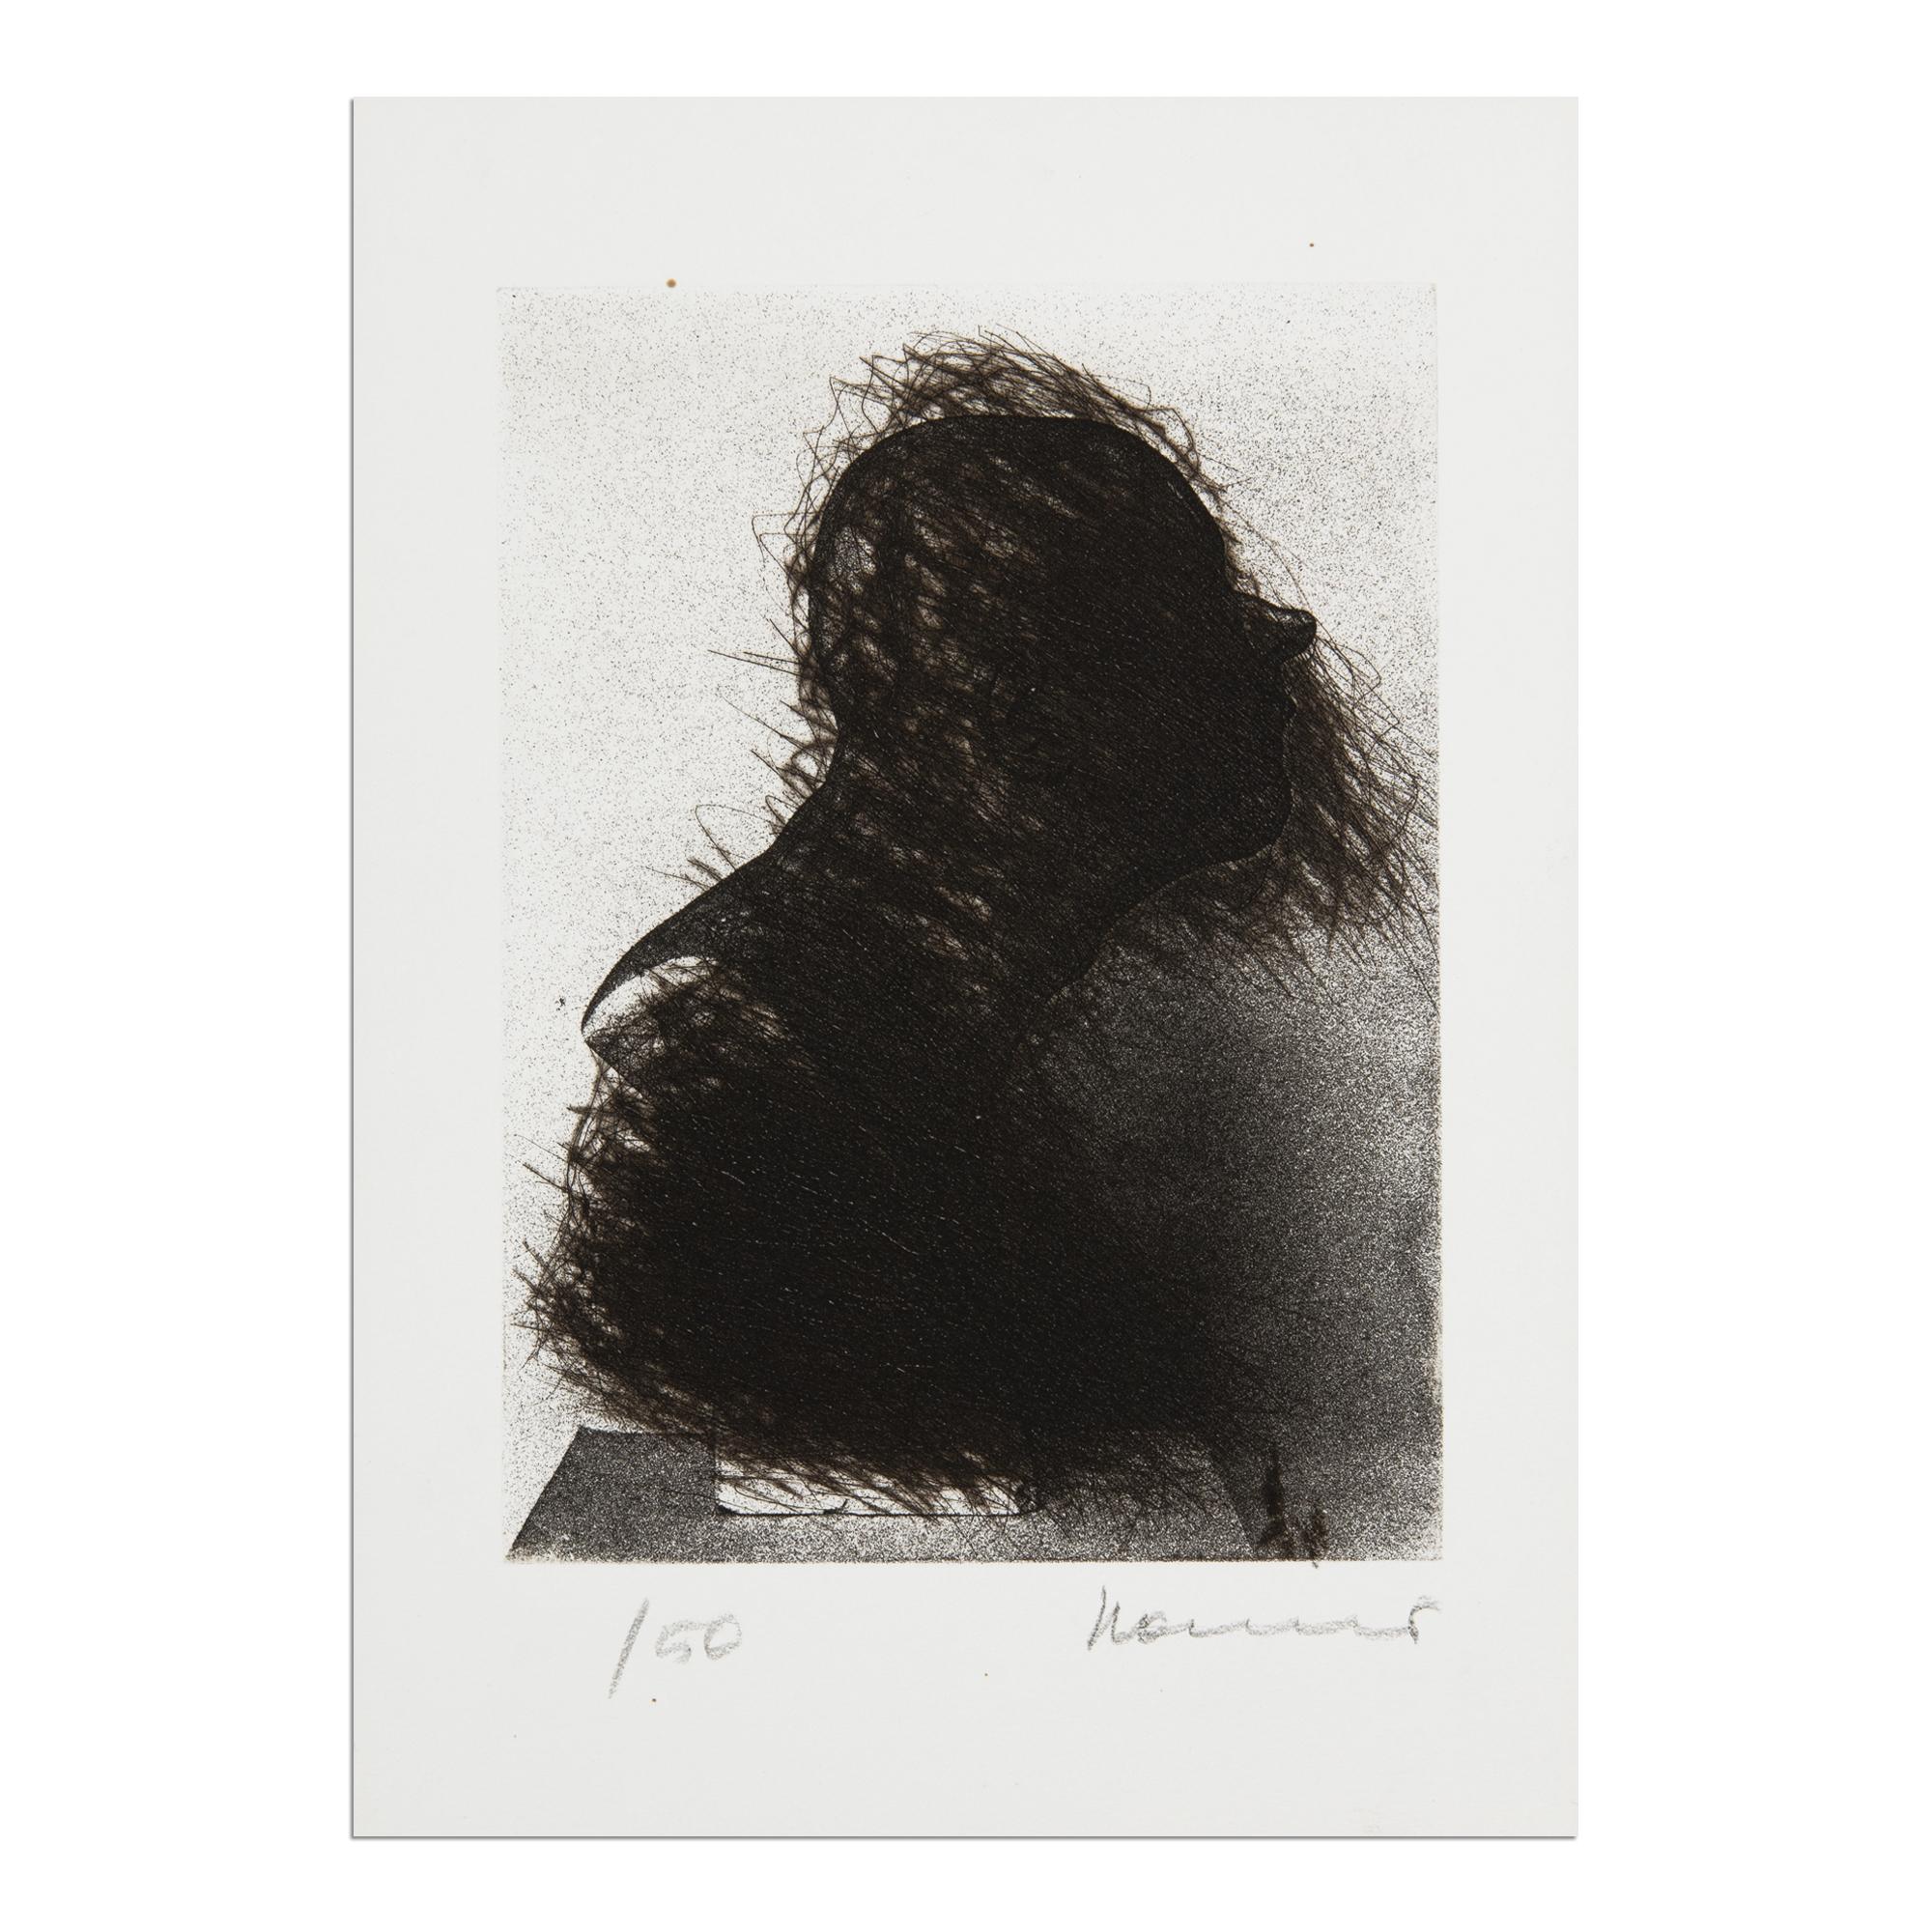 Arnulf Rainer (Austrian, born 1929)
Büste im Nebel, 1977
Medium: Drypoint etching on BFK Rives wove paper
Dimensions: 29.8 × 20.8 cm (11 7/10 × 8 1/5 in)
Edition of 50: Hand-signed and numbered